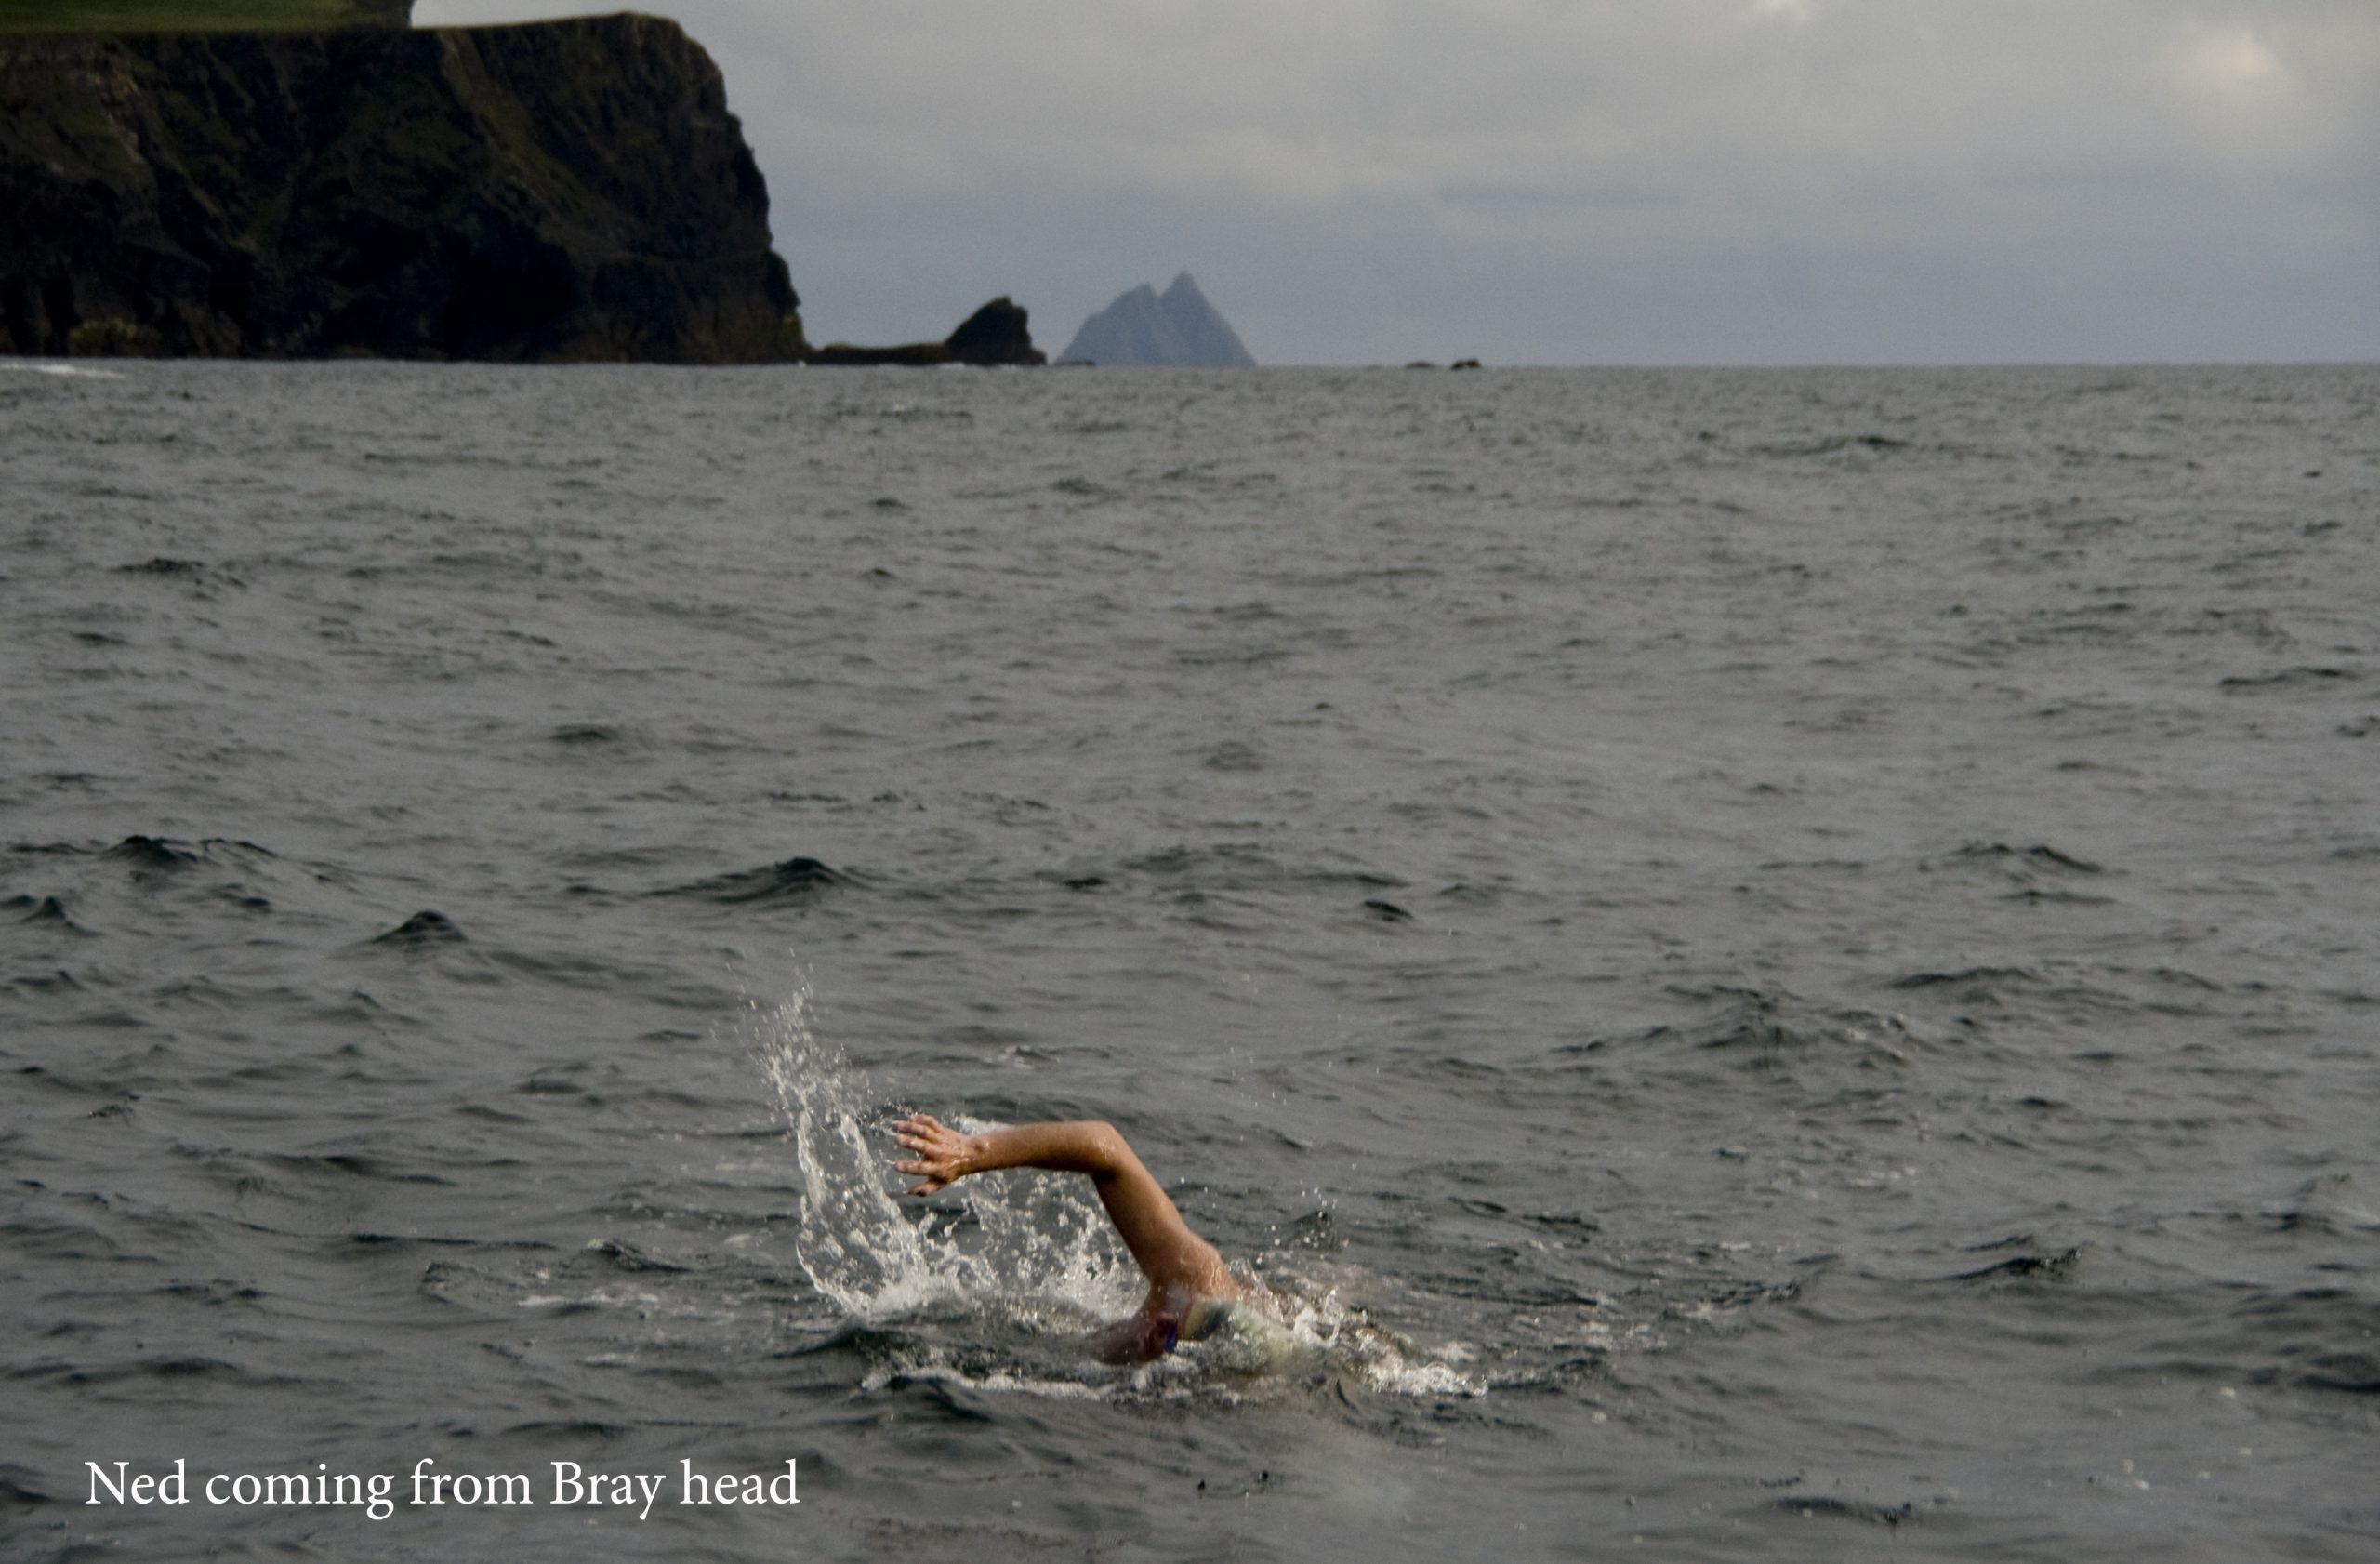 Ned Denison - 1st ever around Valentia Island, with the beautiful Skellig in the backdrop